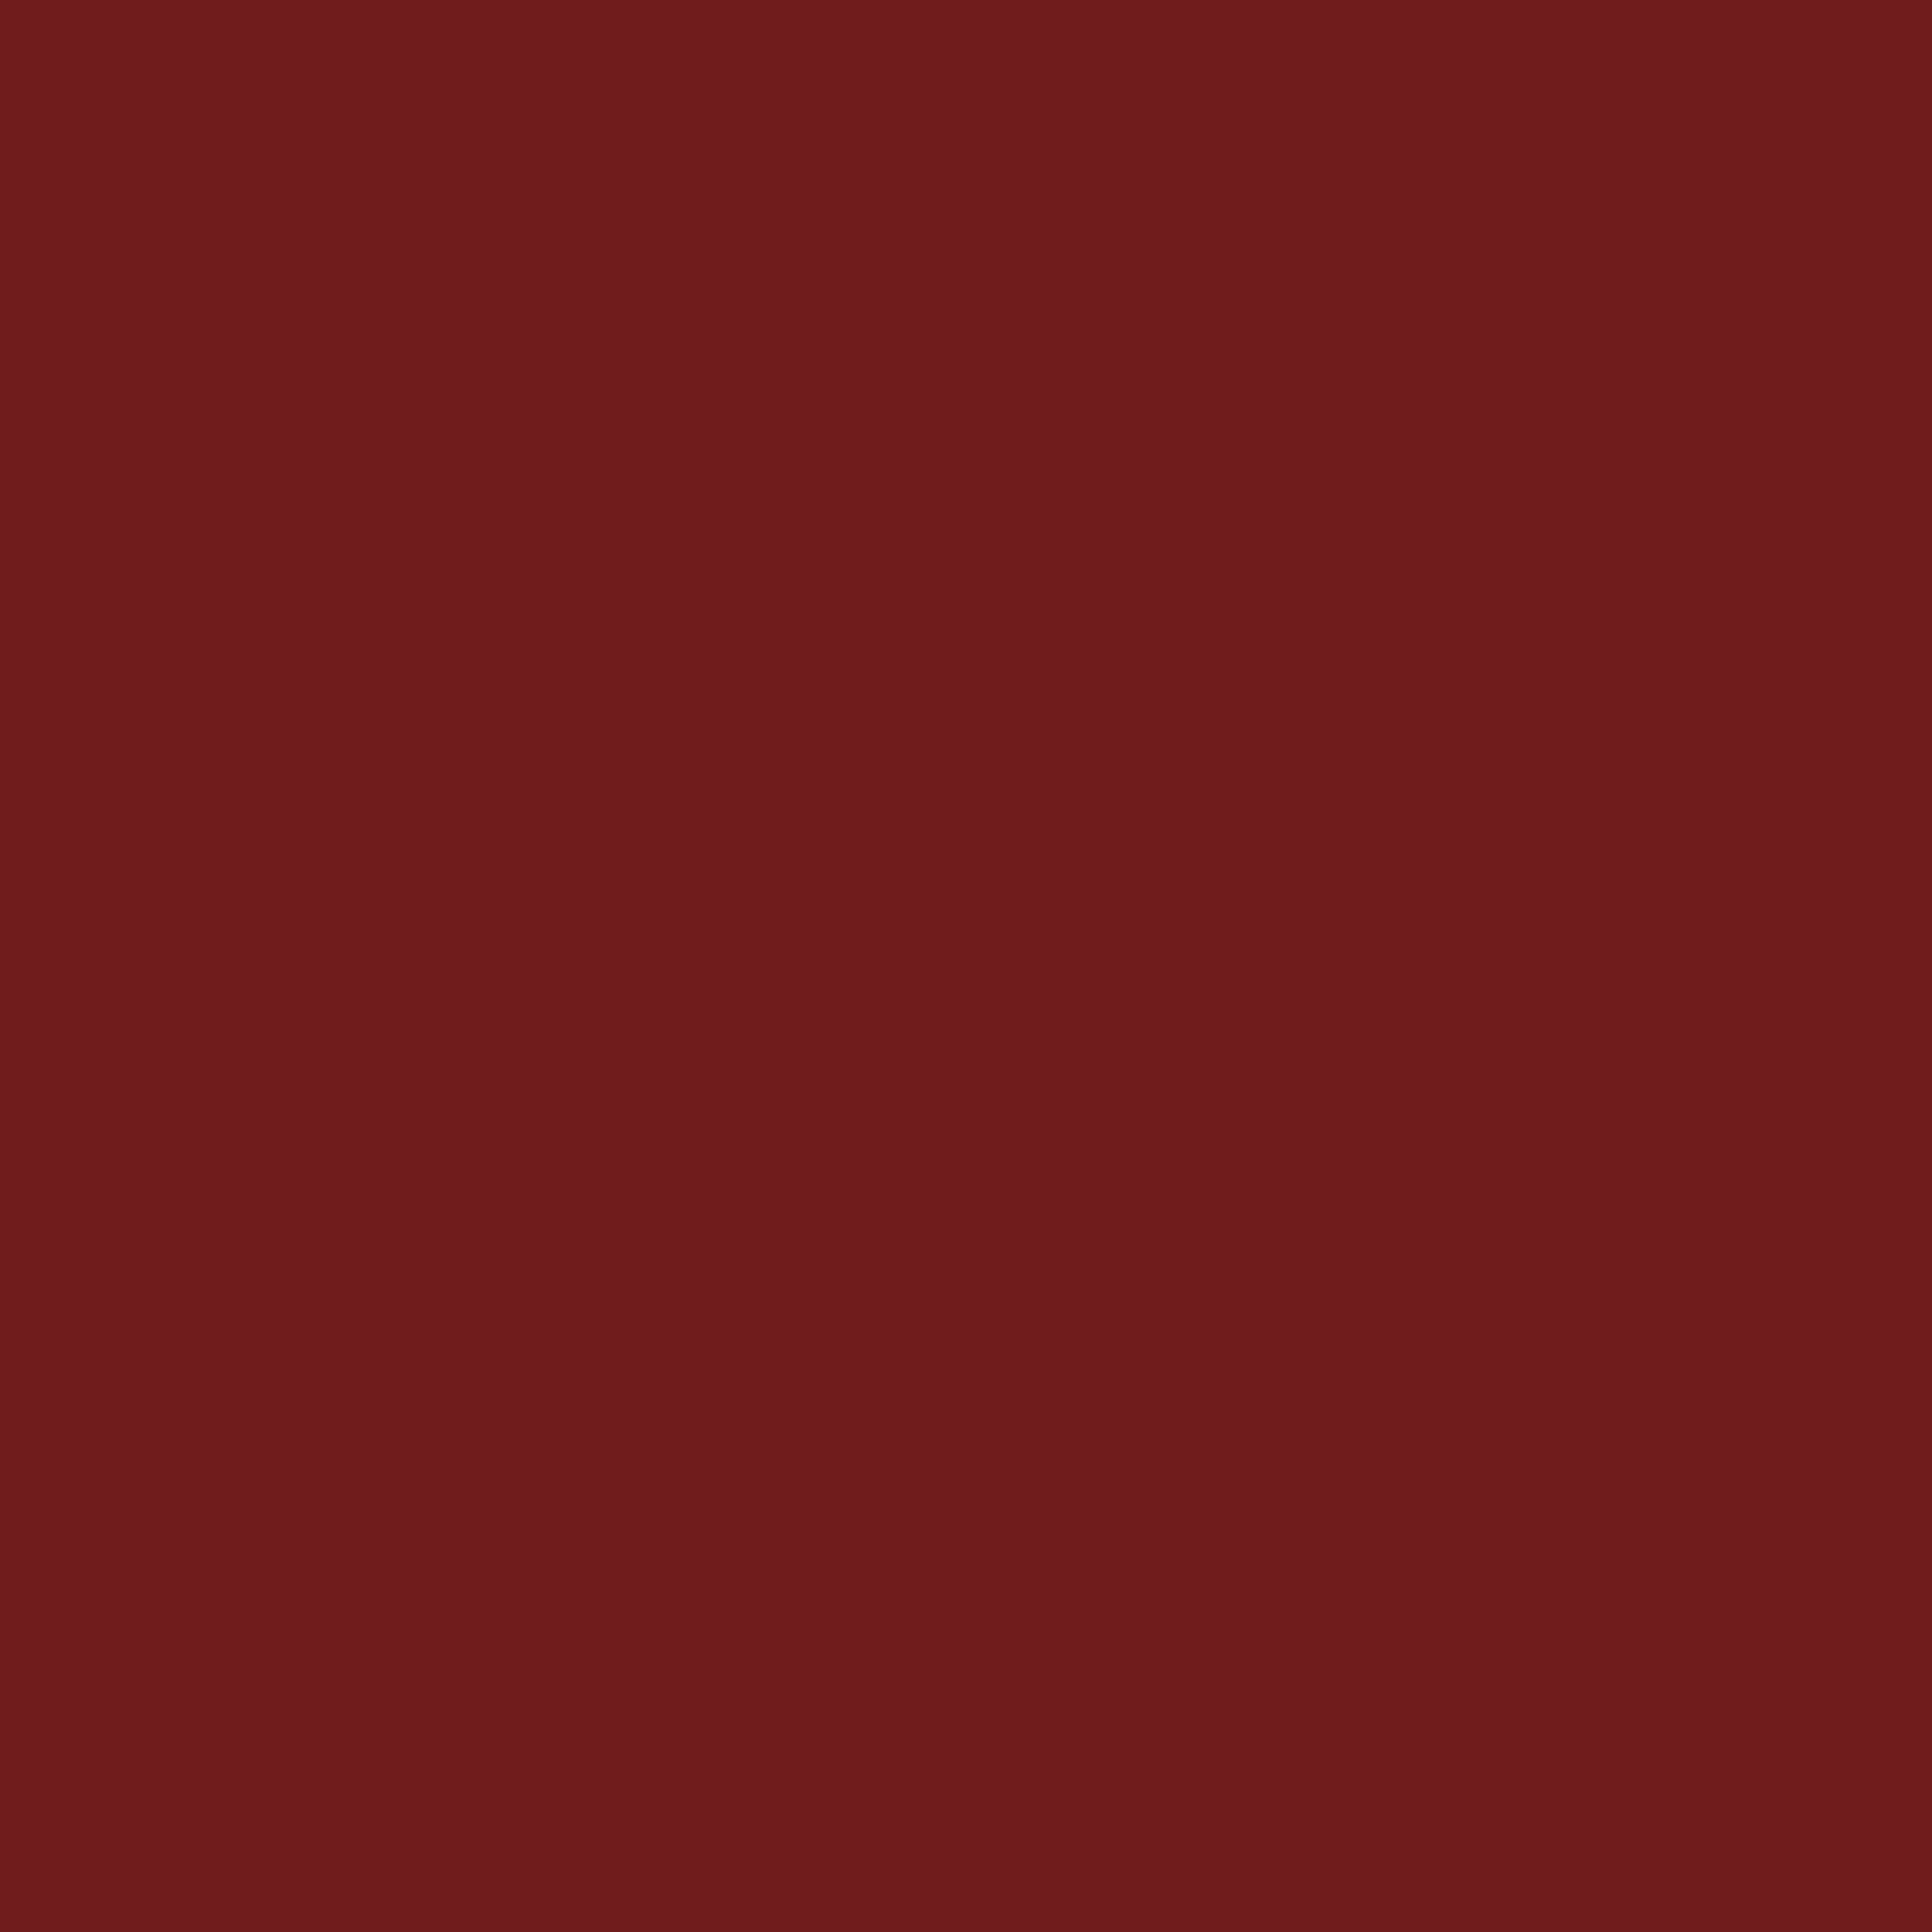 2732x2732 Persian Plum Solid Color Background